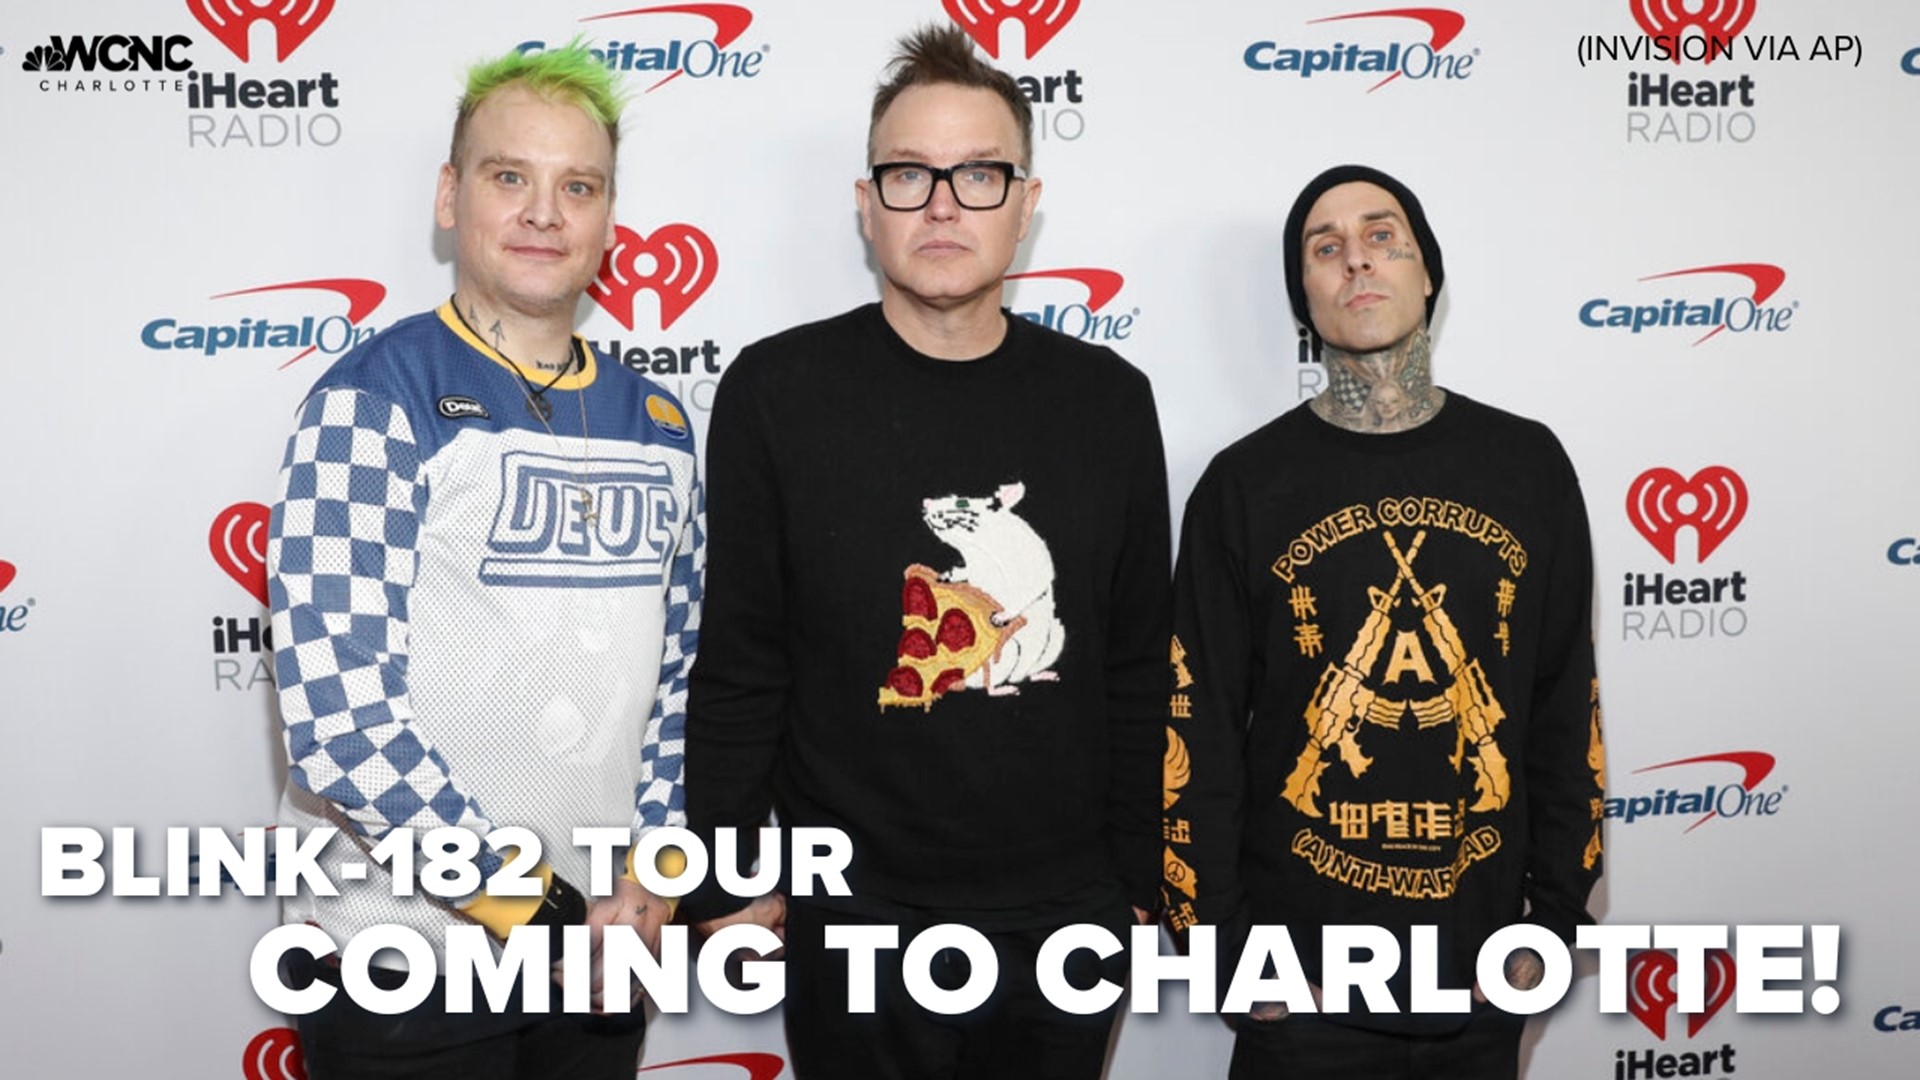 Blink 182 is set to perform in Charlotte next July. Tickets go on sale Monday at 10am.